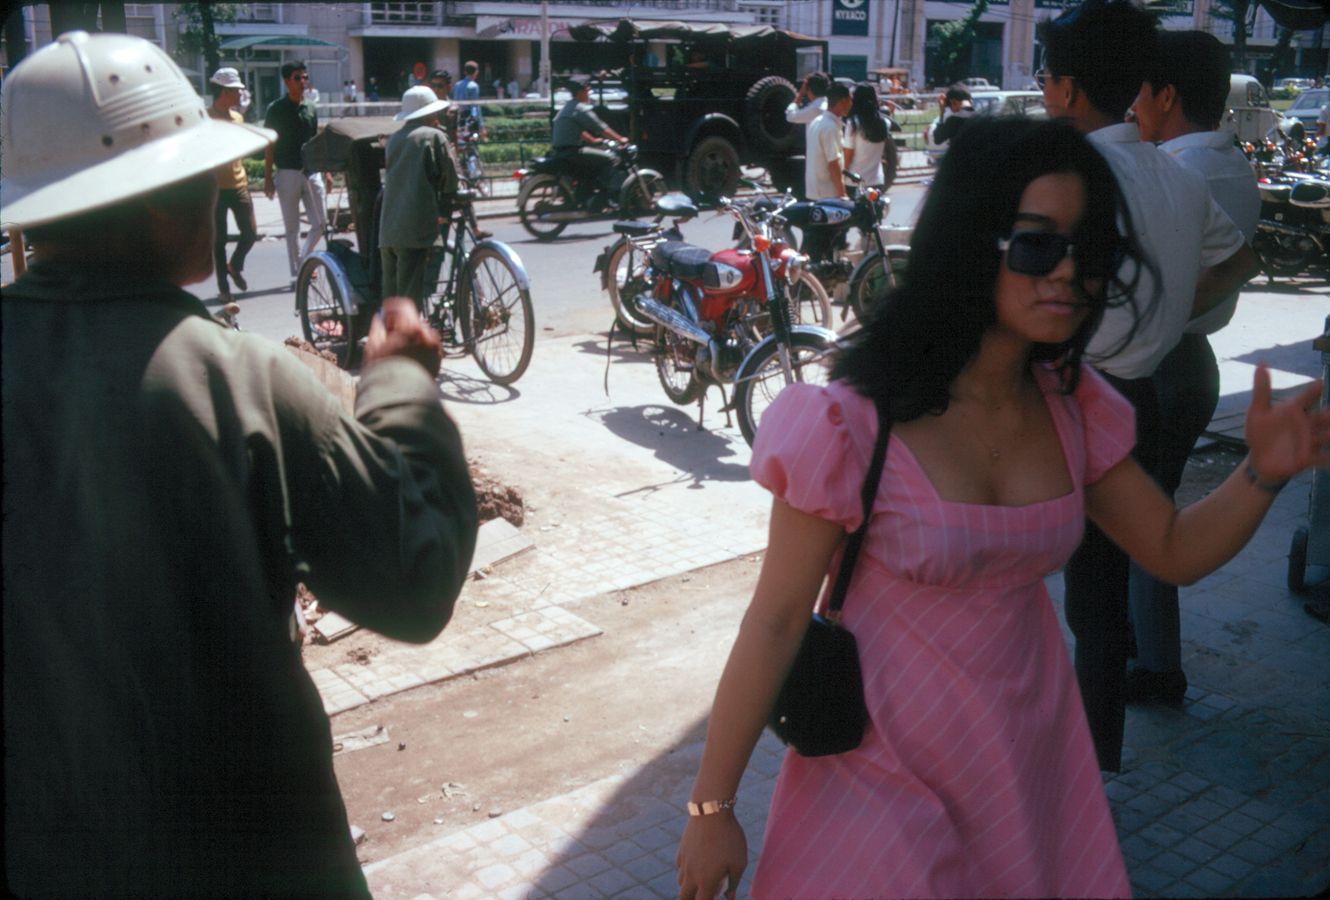 a woman in a pink dress walking near men on bicycles